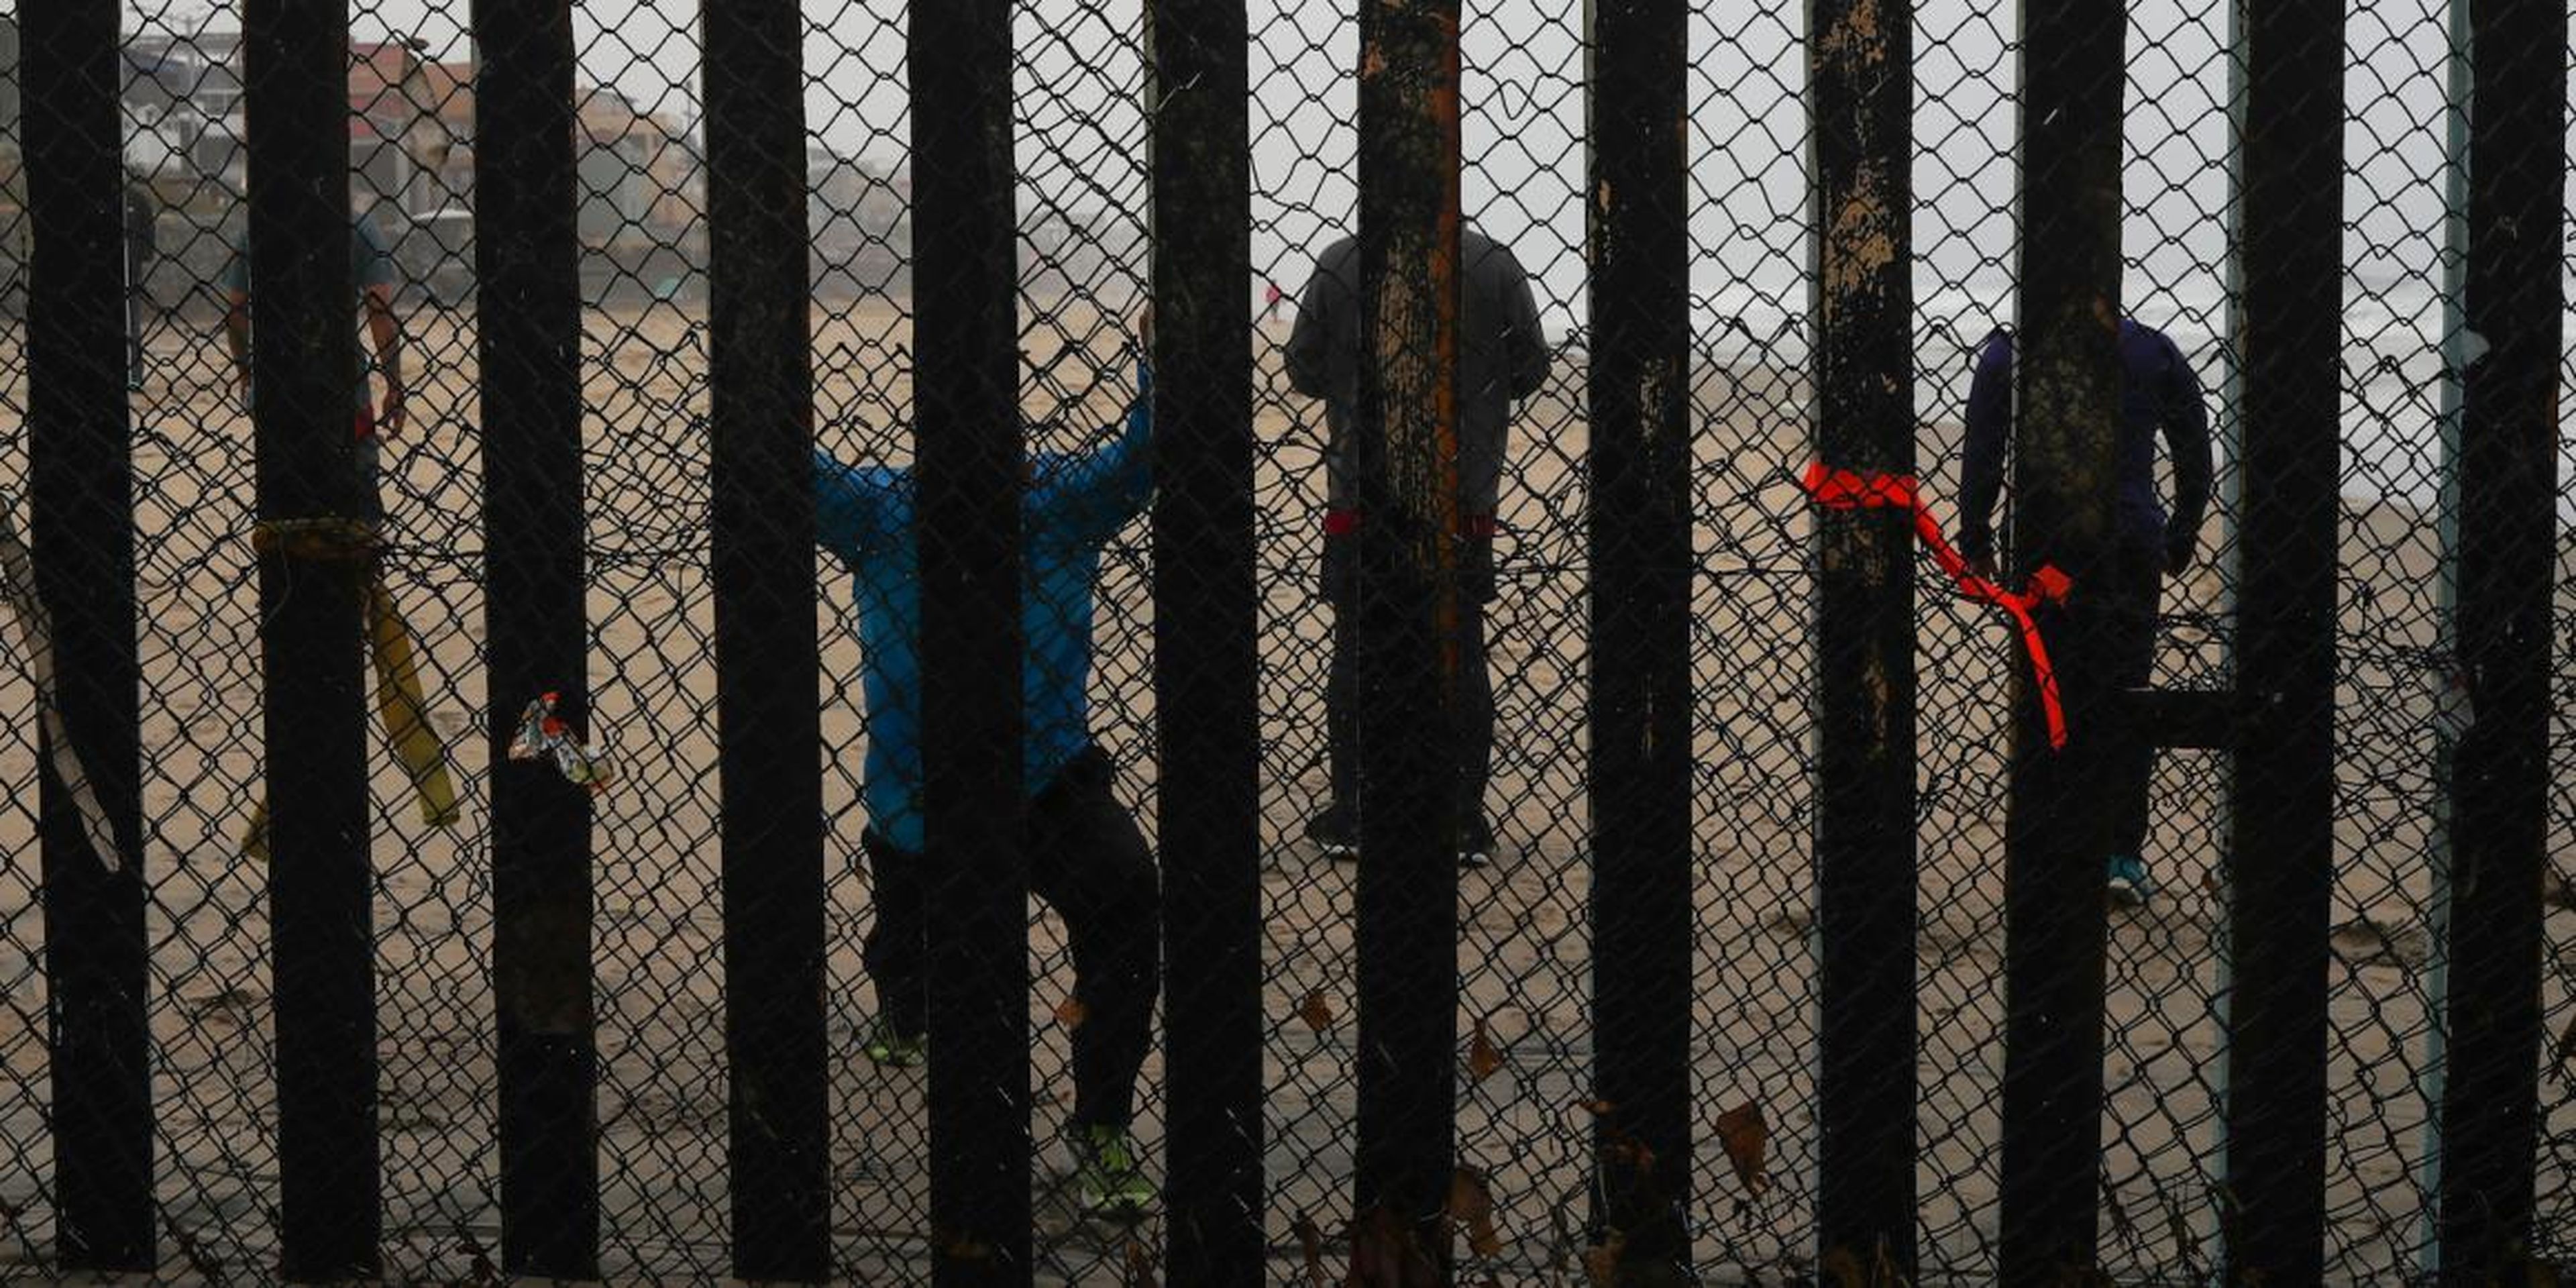 People on the Mexico side of the border wall near San Diego in June 2018.